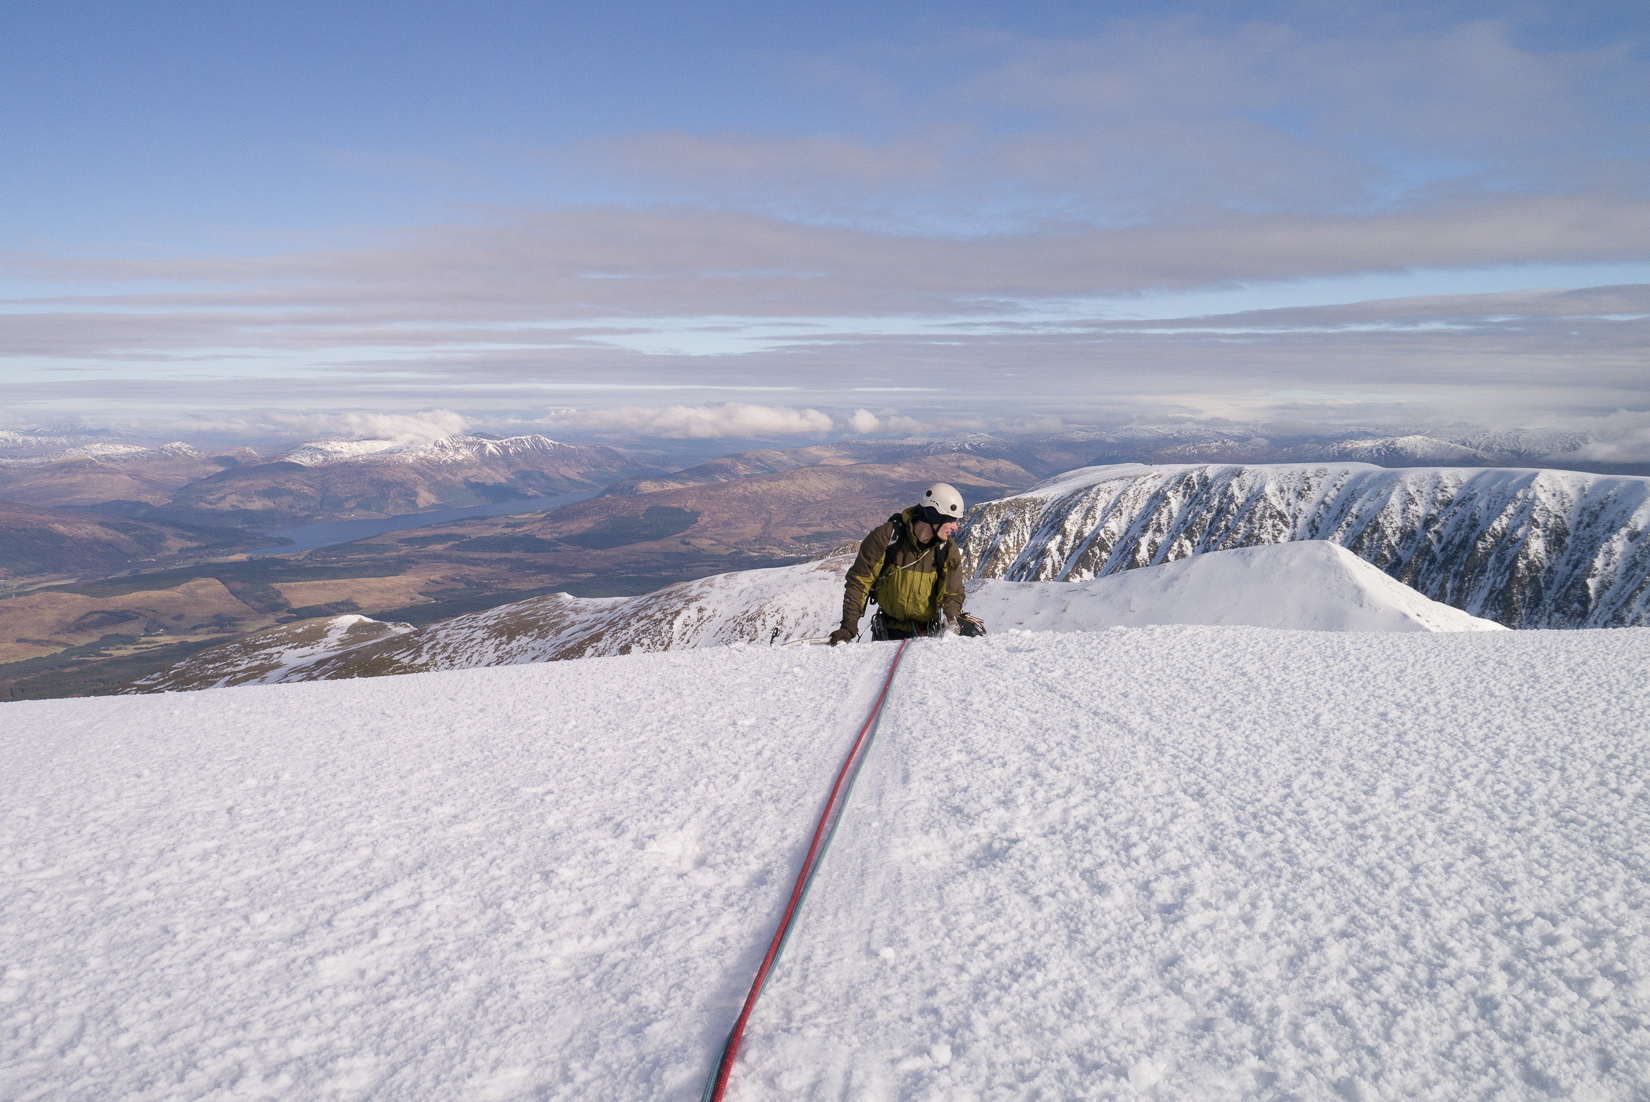 Topping out of Point Five gully in brilliant conditions